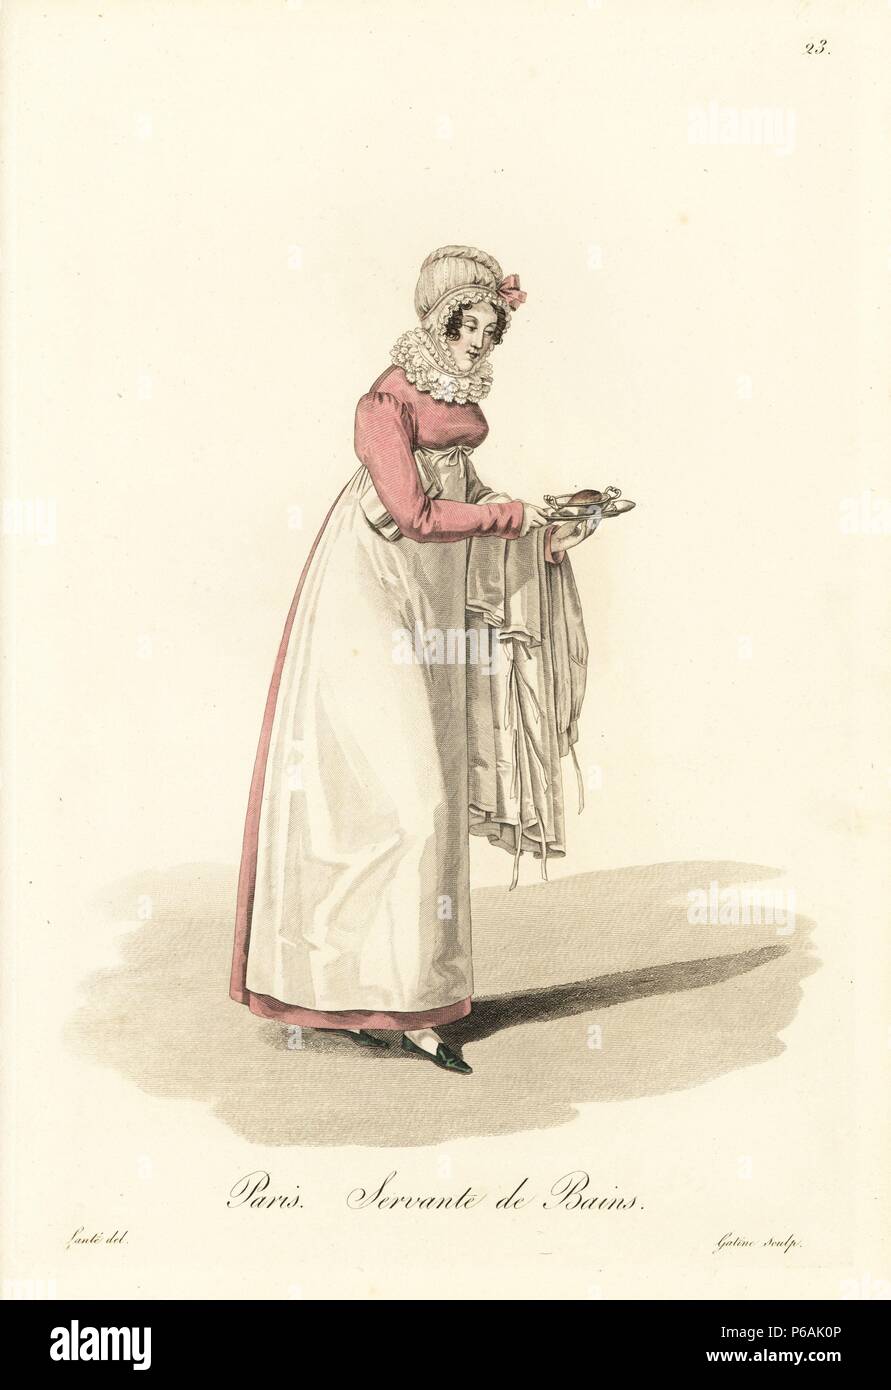 Servant at the baths, Paris, early 19th century, in lace bonnet and collar,  pink dress and white apron, carrying a dish of soap and bath linen.  Handcoloured copperplate engraving by Gatine after